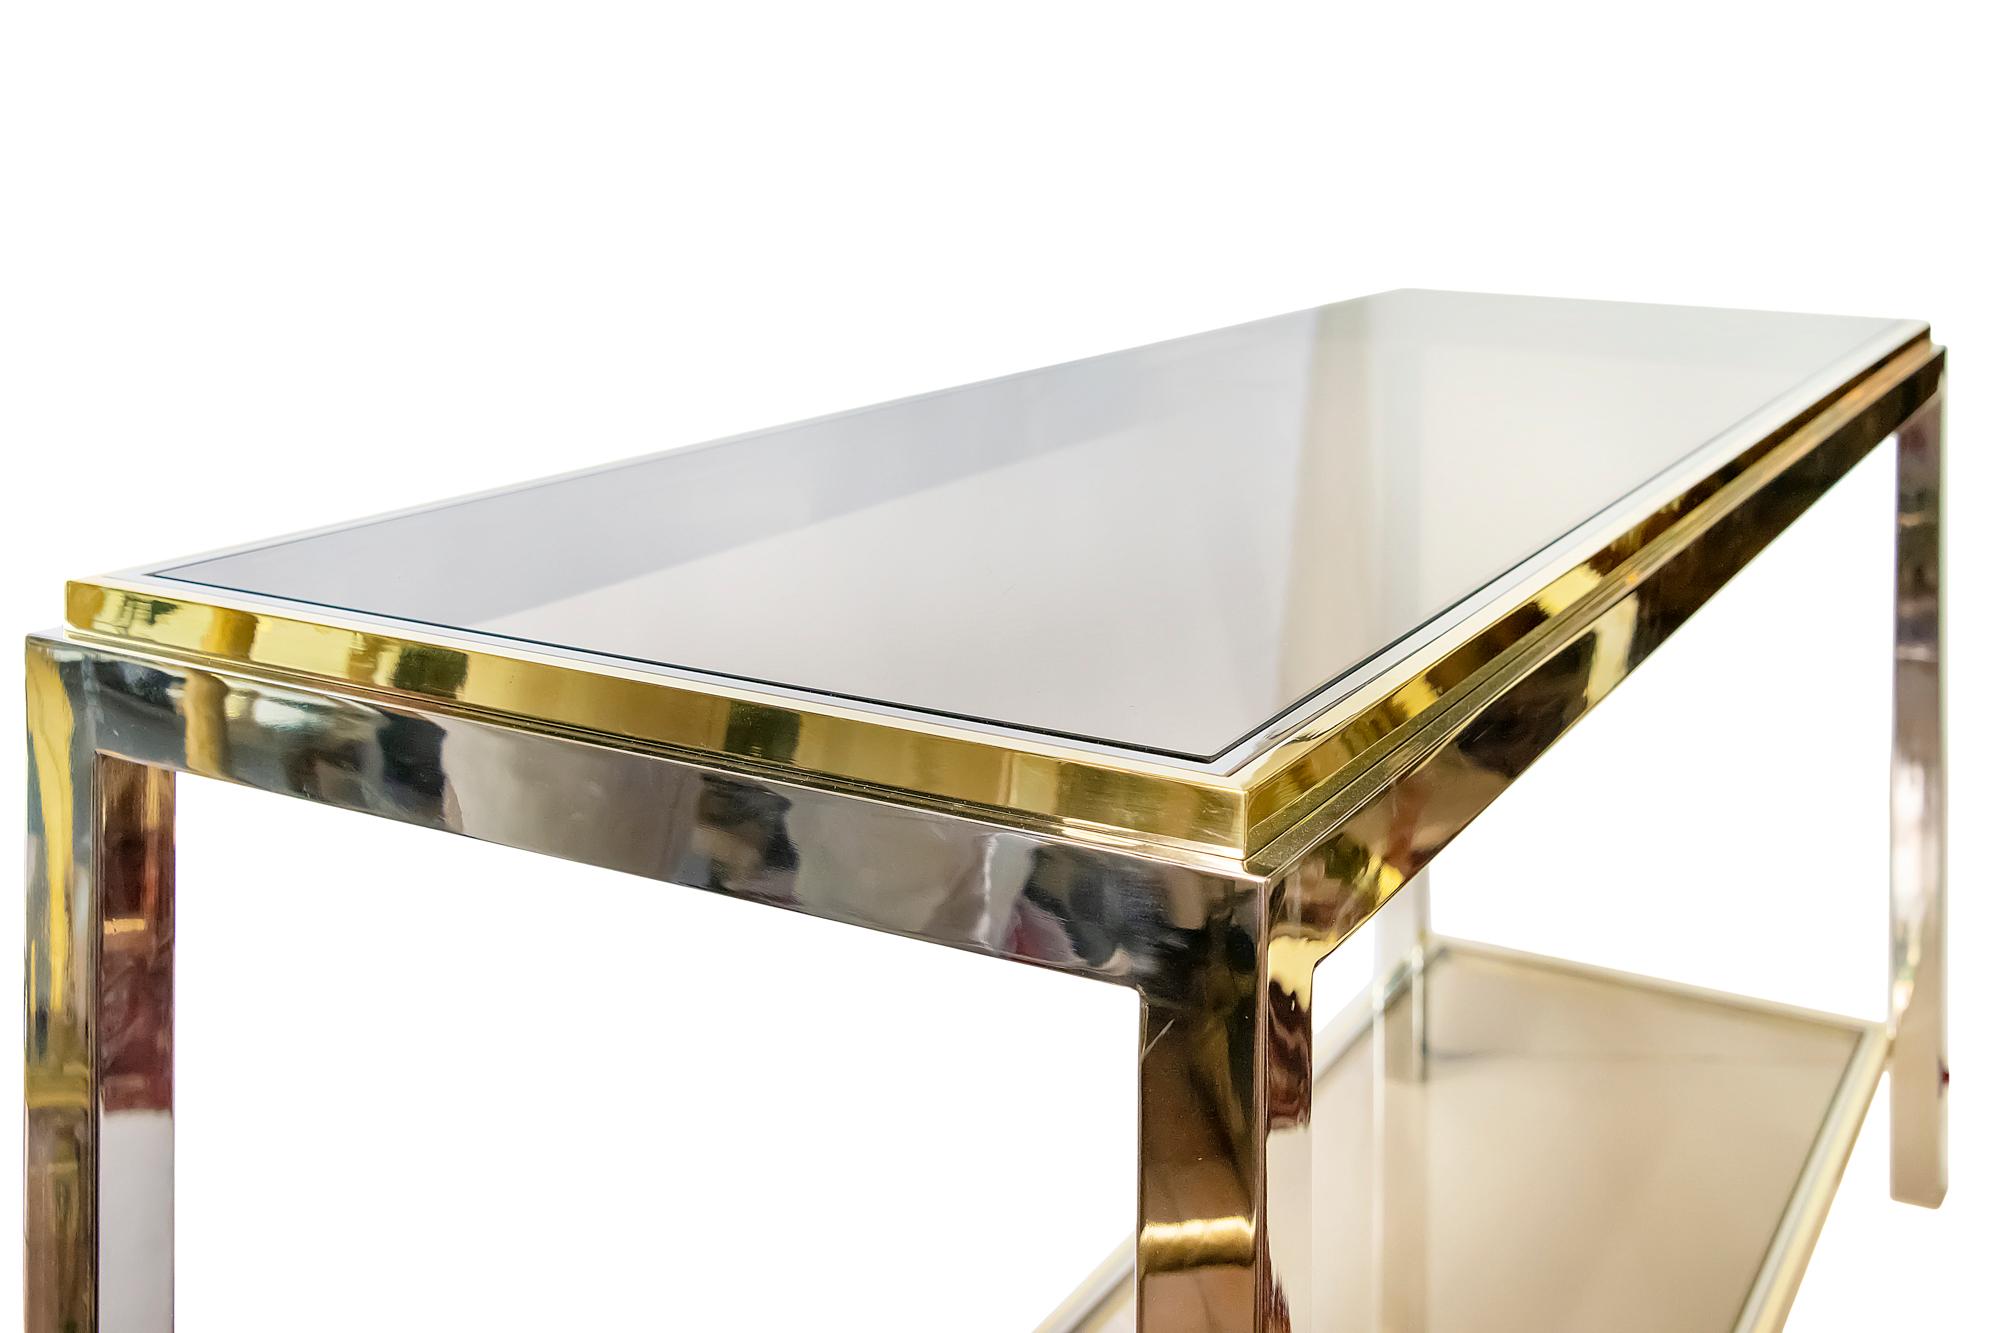 Midcentury brass, chrome and glass console table.
The top and down shelve of this console are with brown glass.
Overall very good condition.